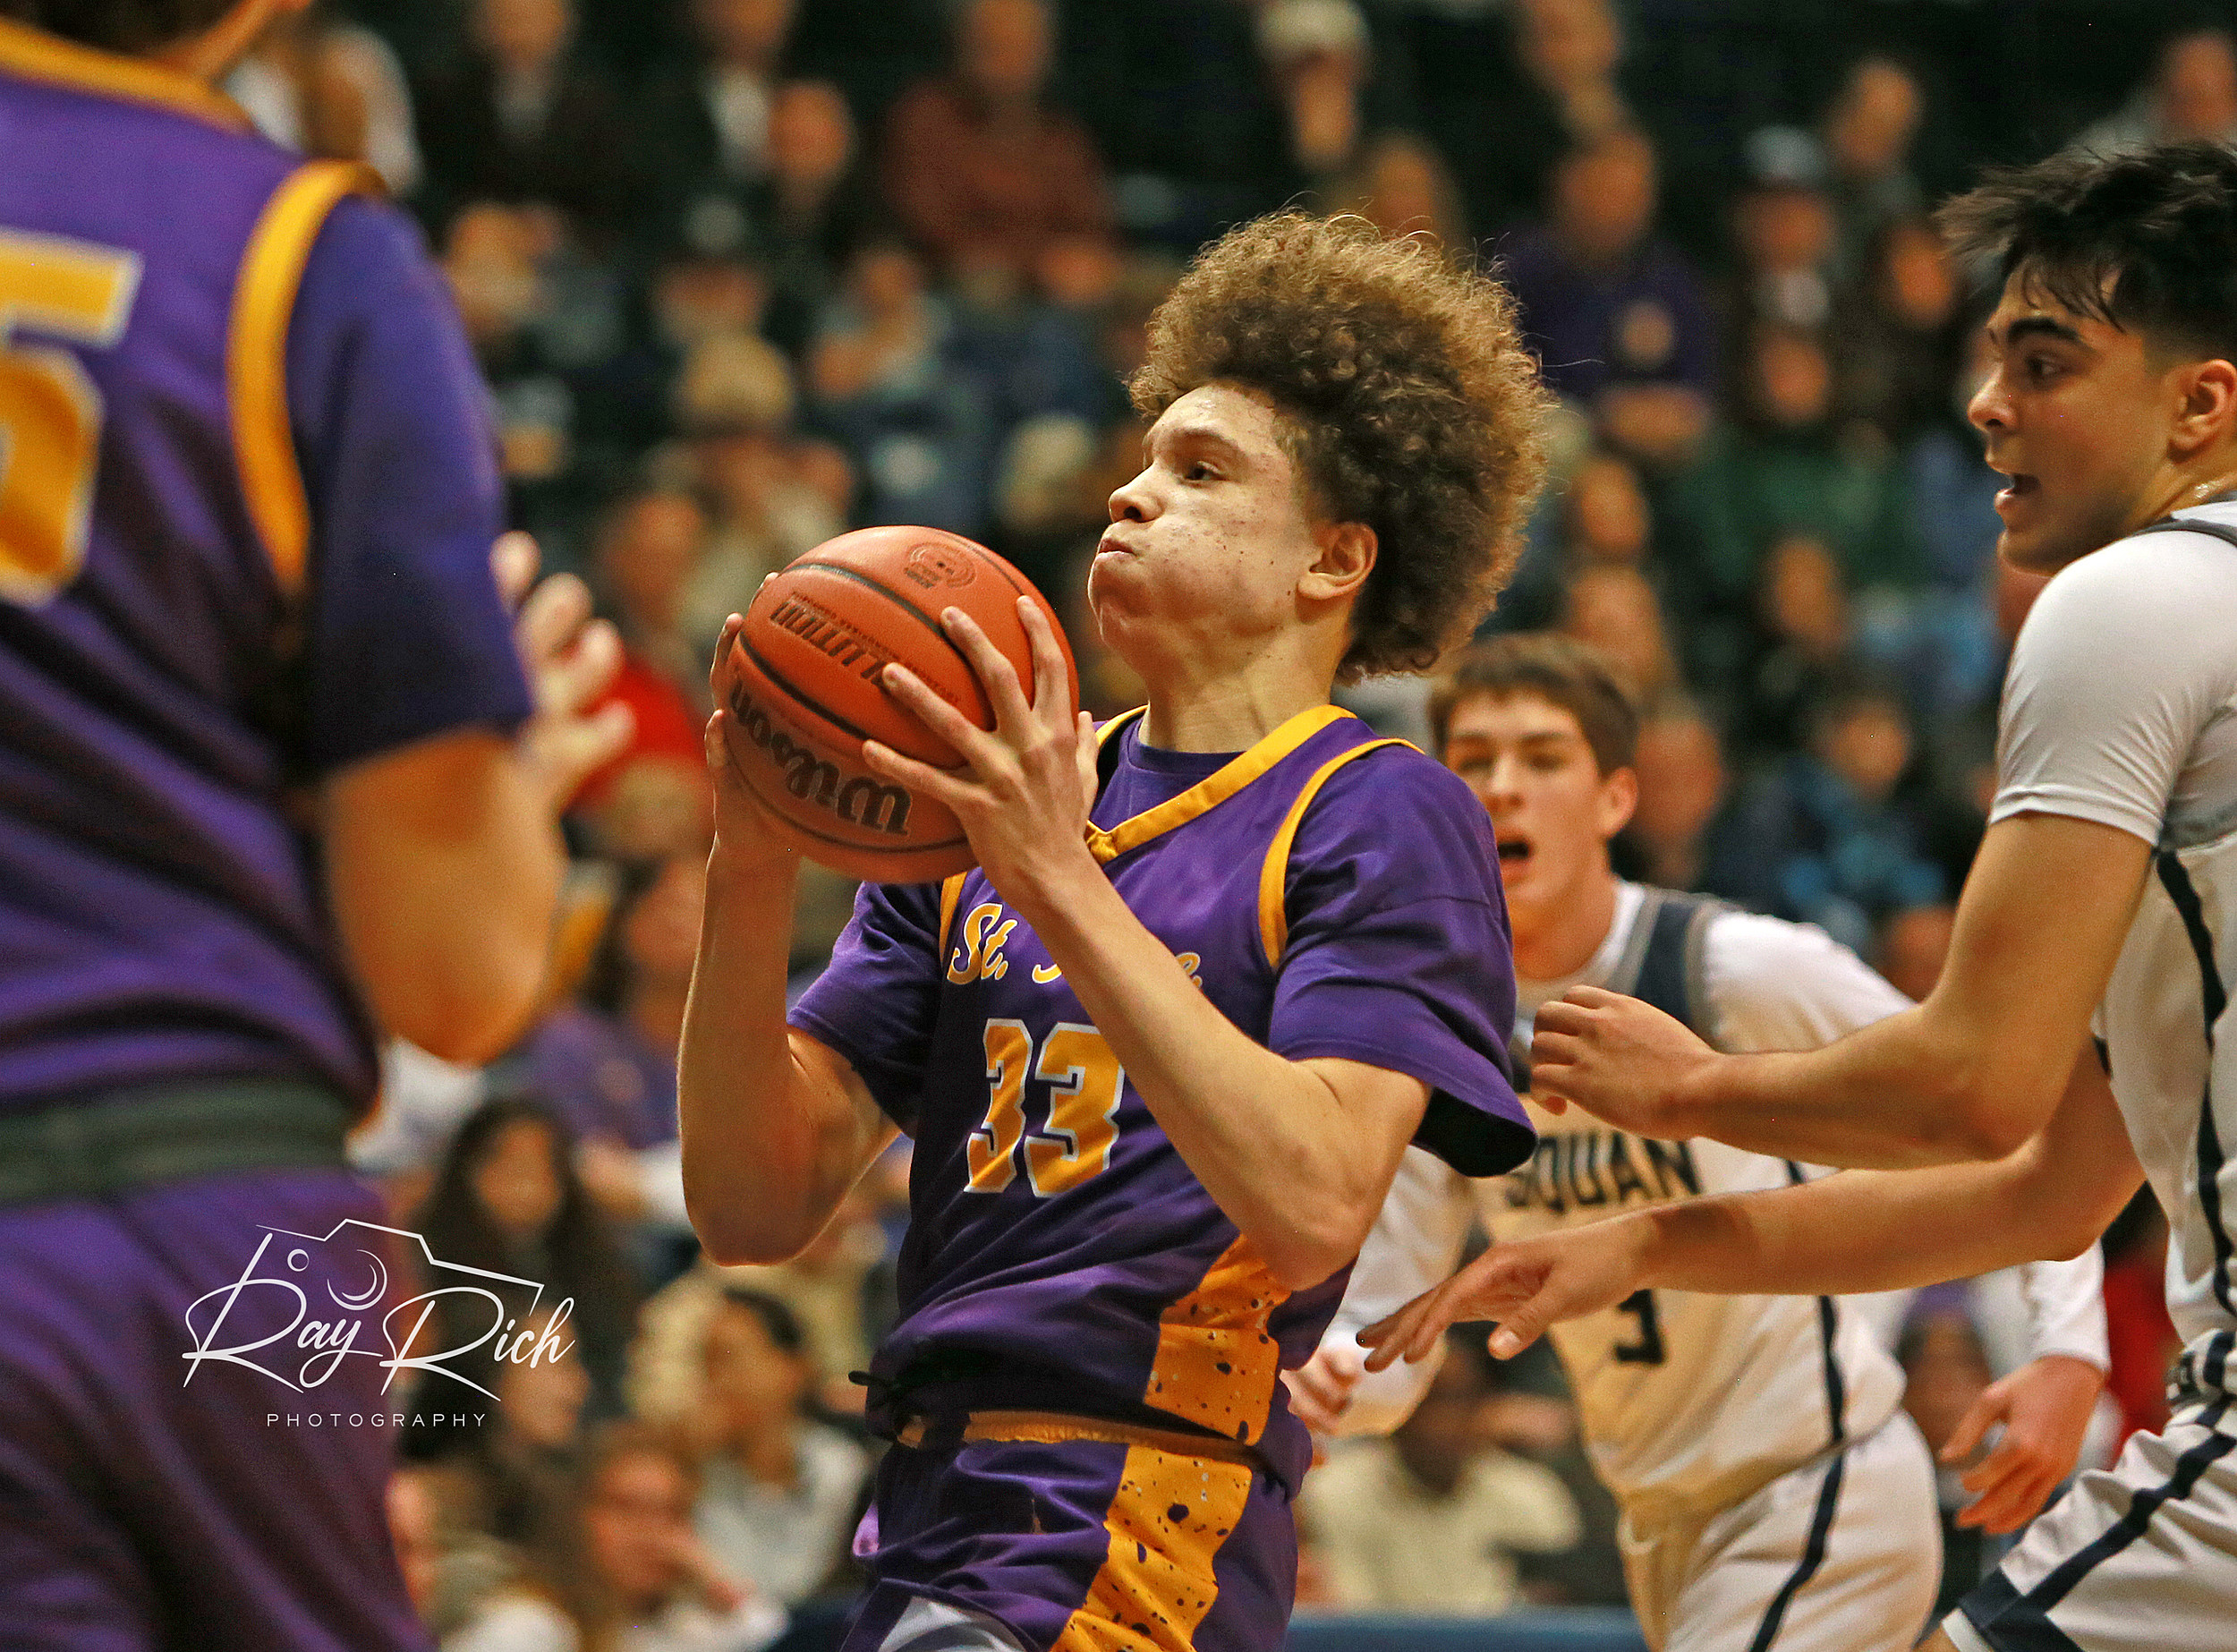 St. Rose sophomore Jayden Hodge. (Photo: Ray Rich Photography)